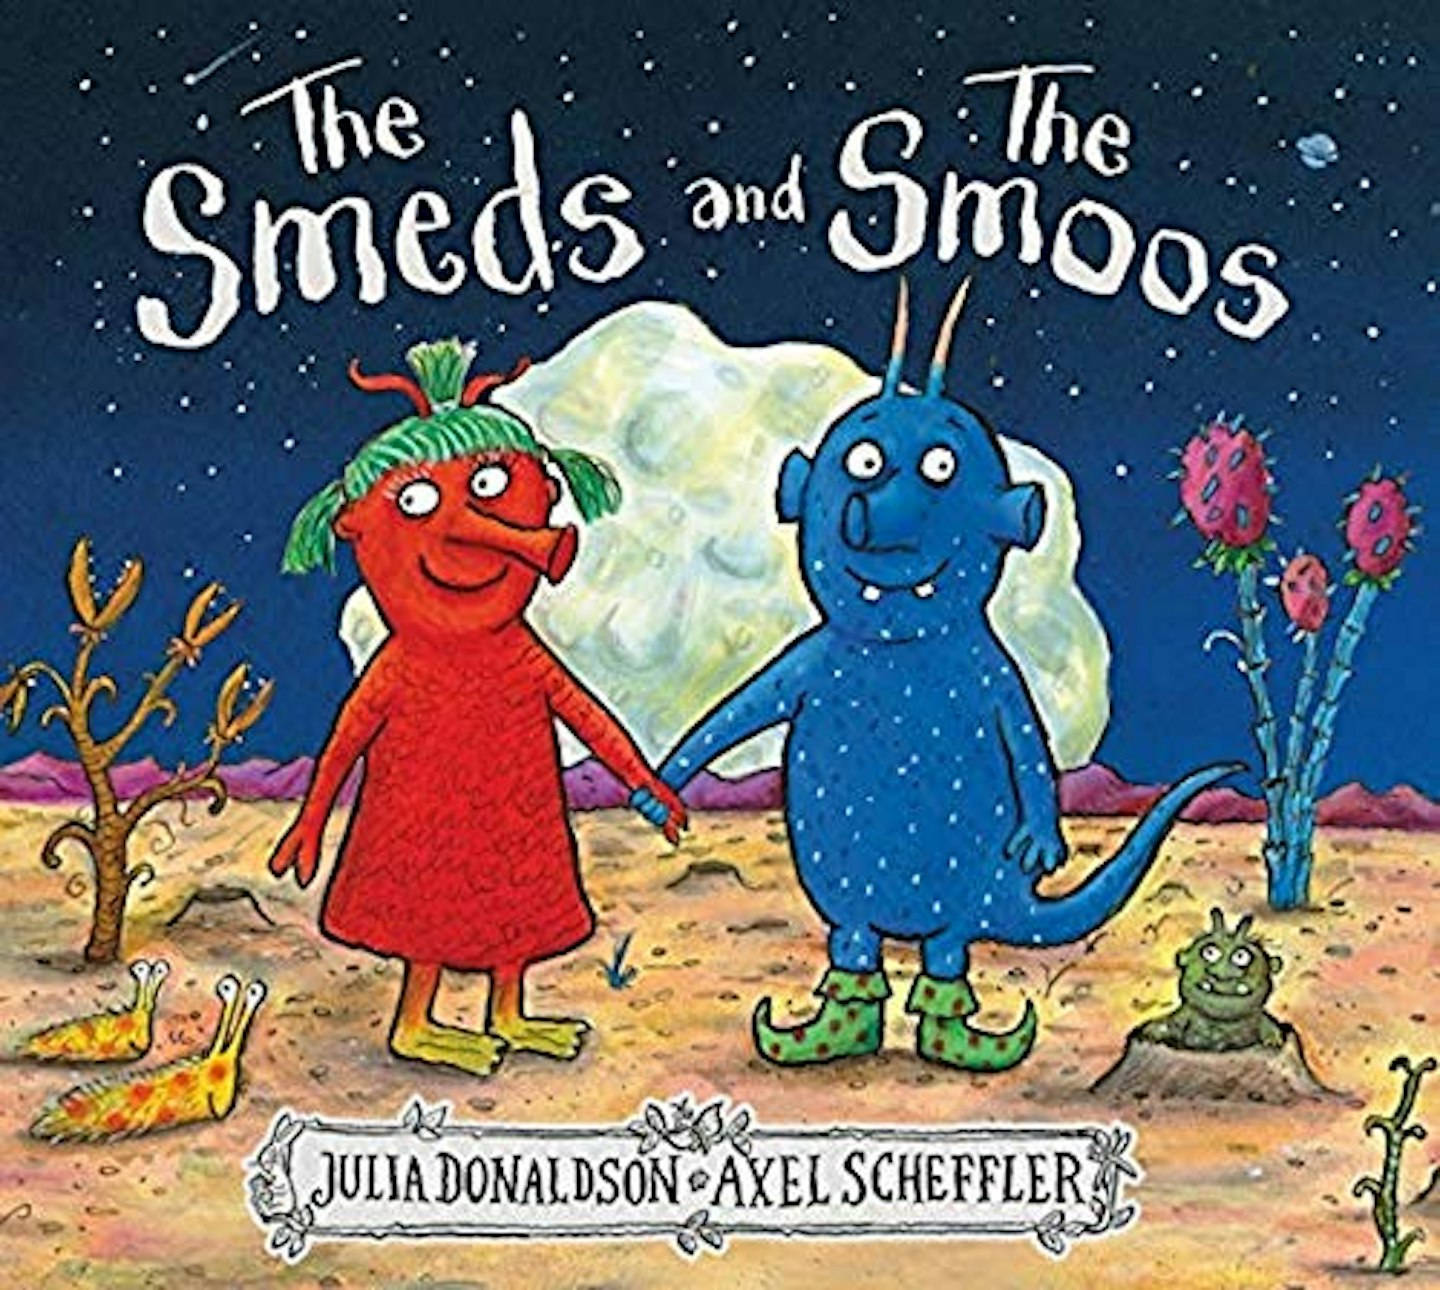 The Smeds and the Smoos by Julia Donaldson